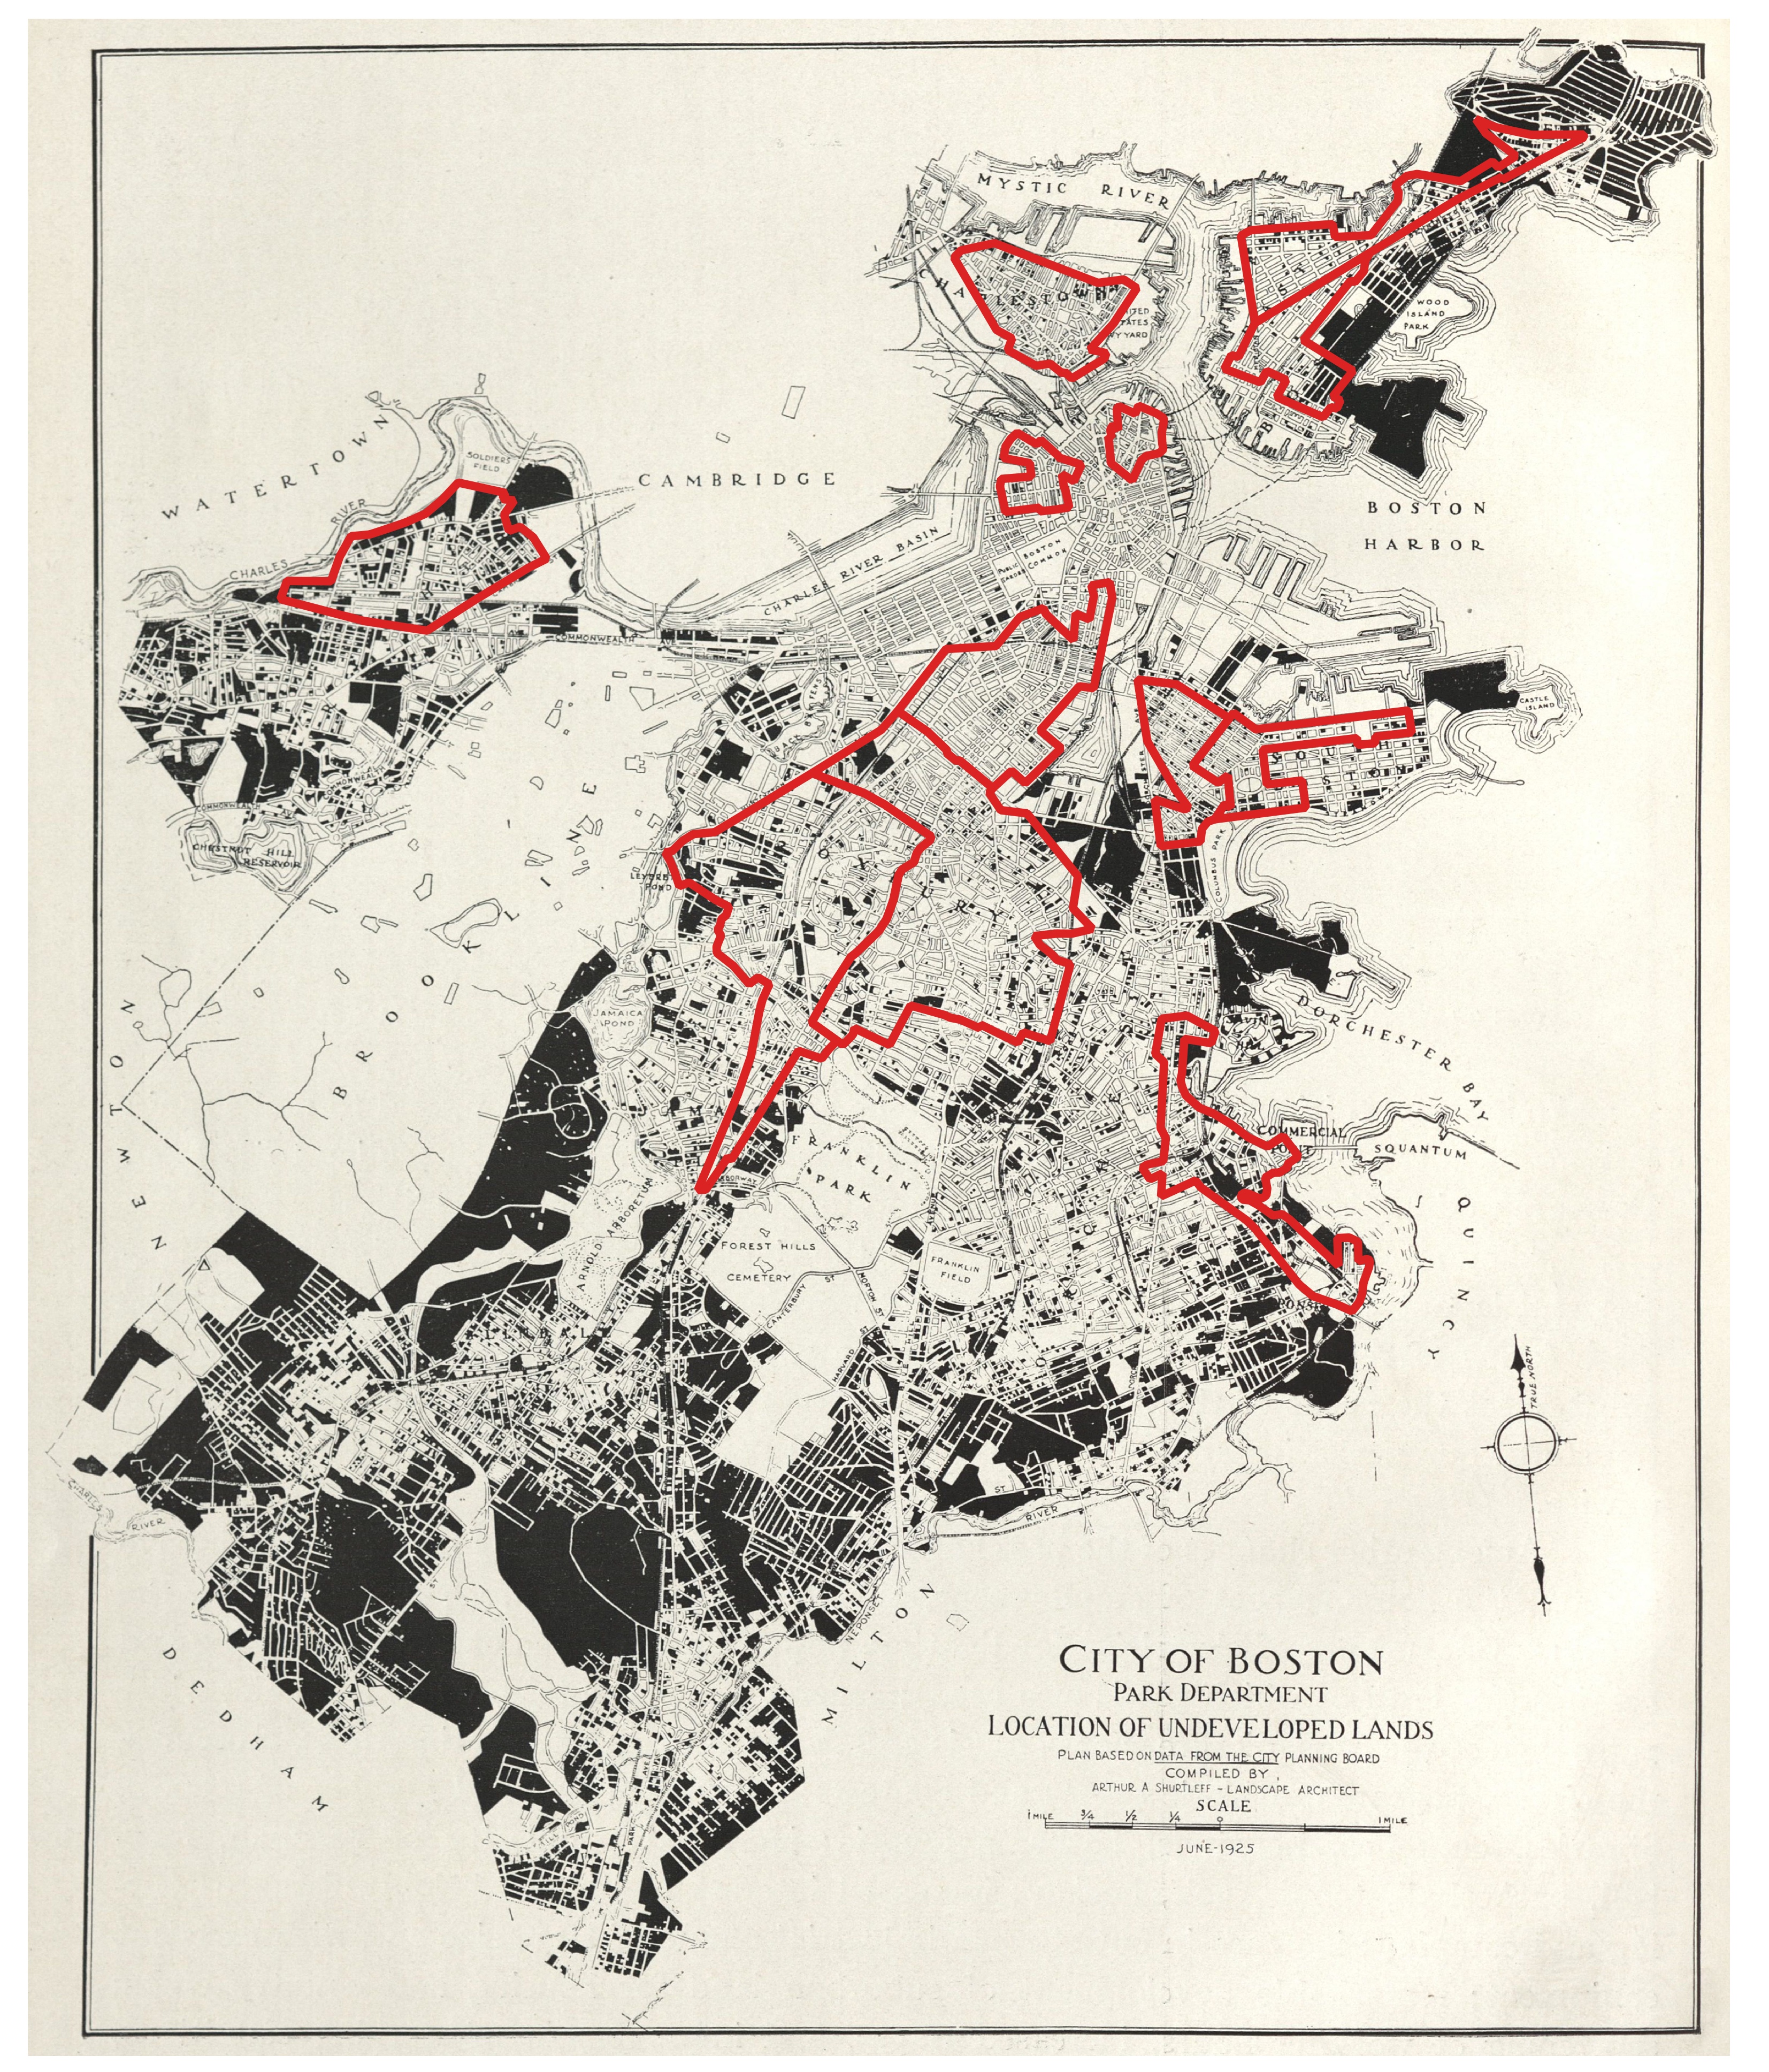 Location of Undeveloped Lands, Arthur A. Shurtleff; City of Boston Park Department, 1925